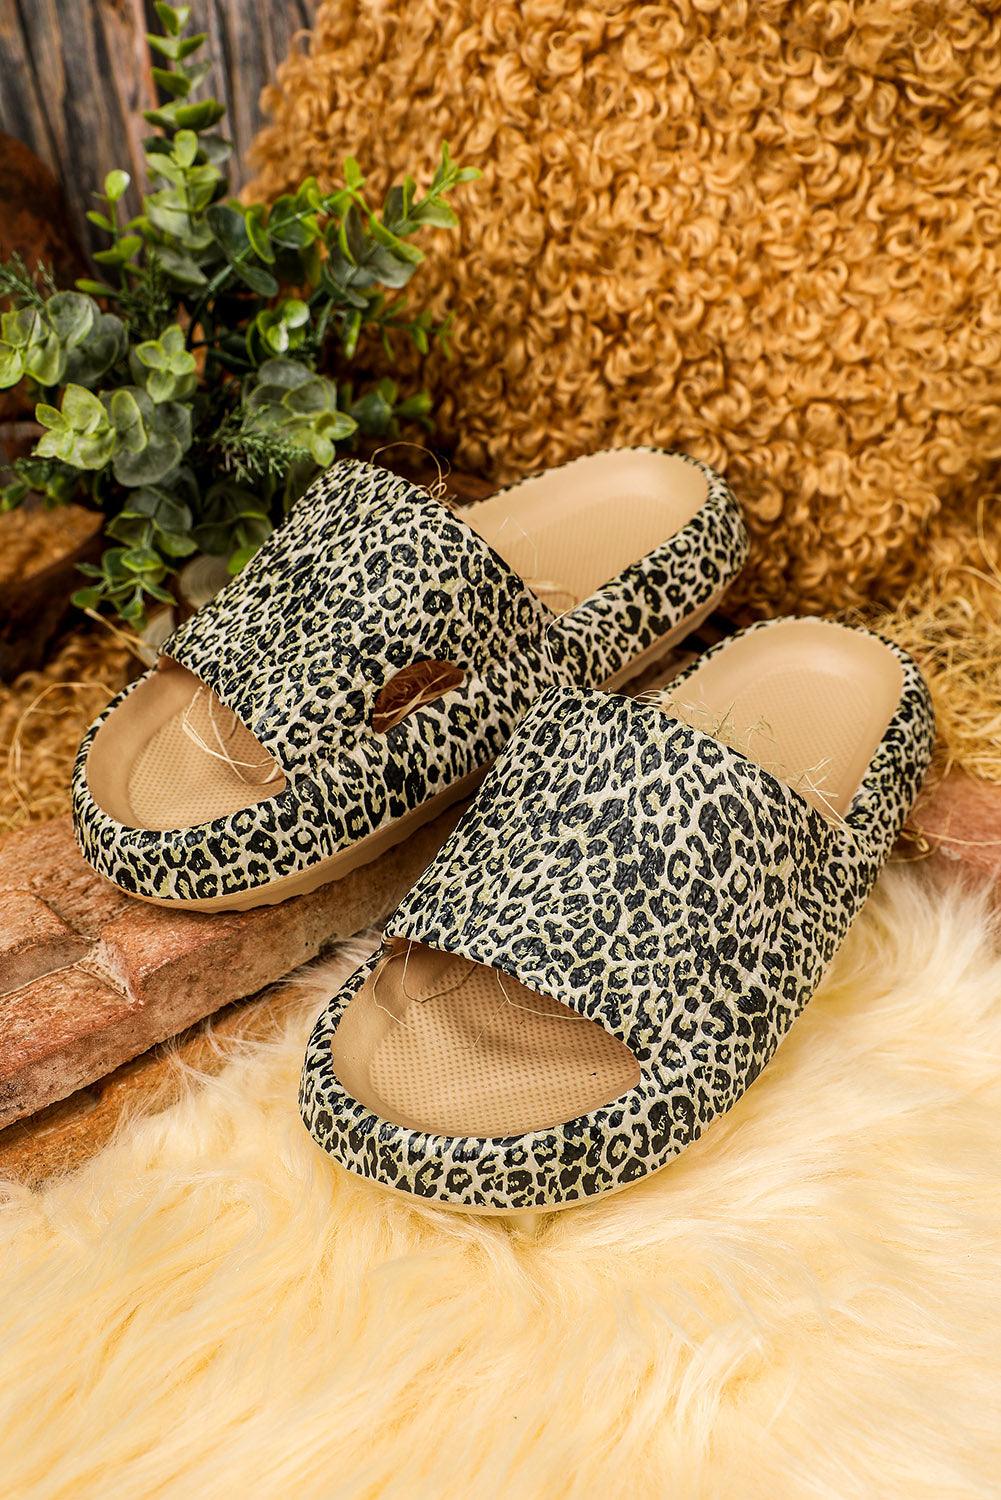 Women's Shoes - Slippers Leopard Soft Rubber Slippers